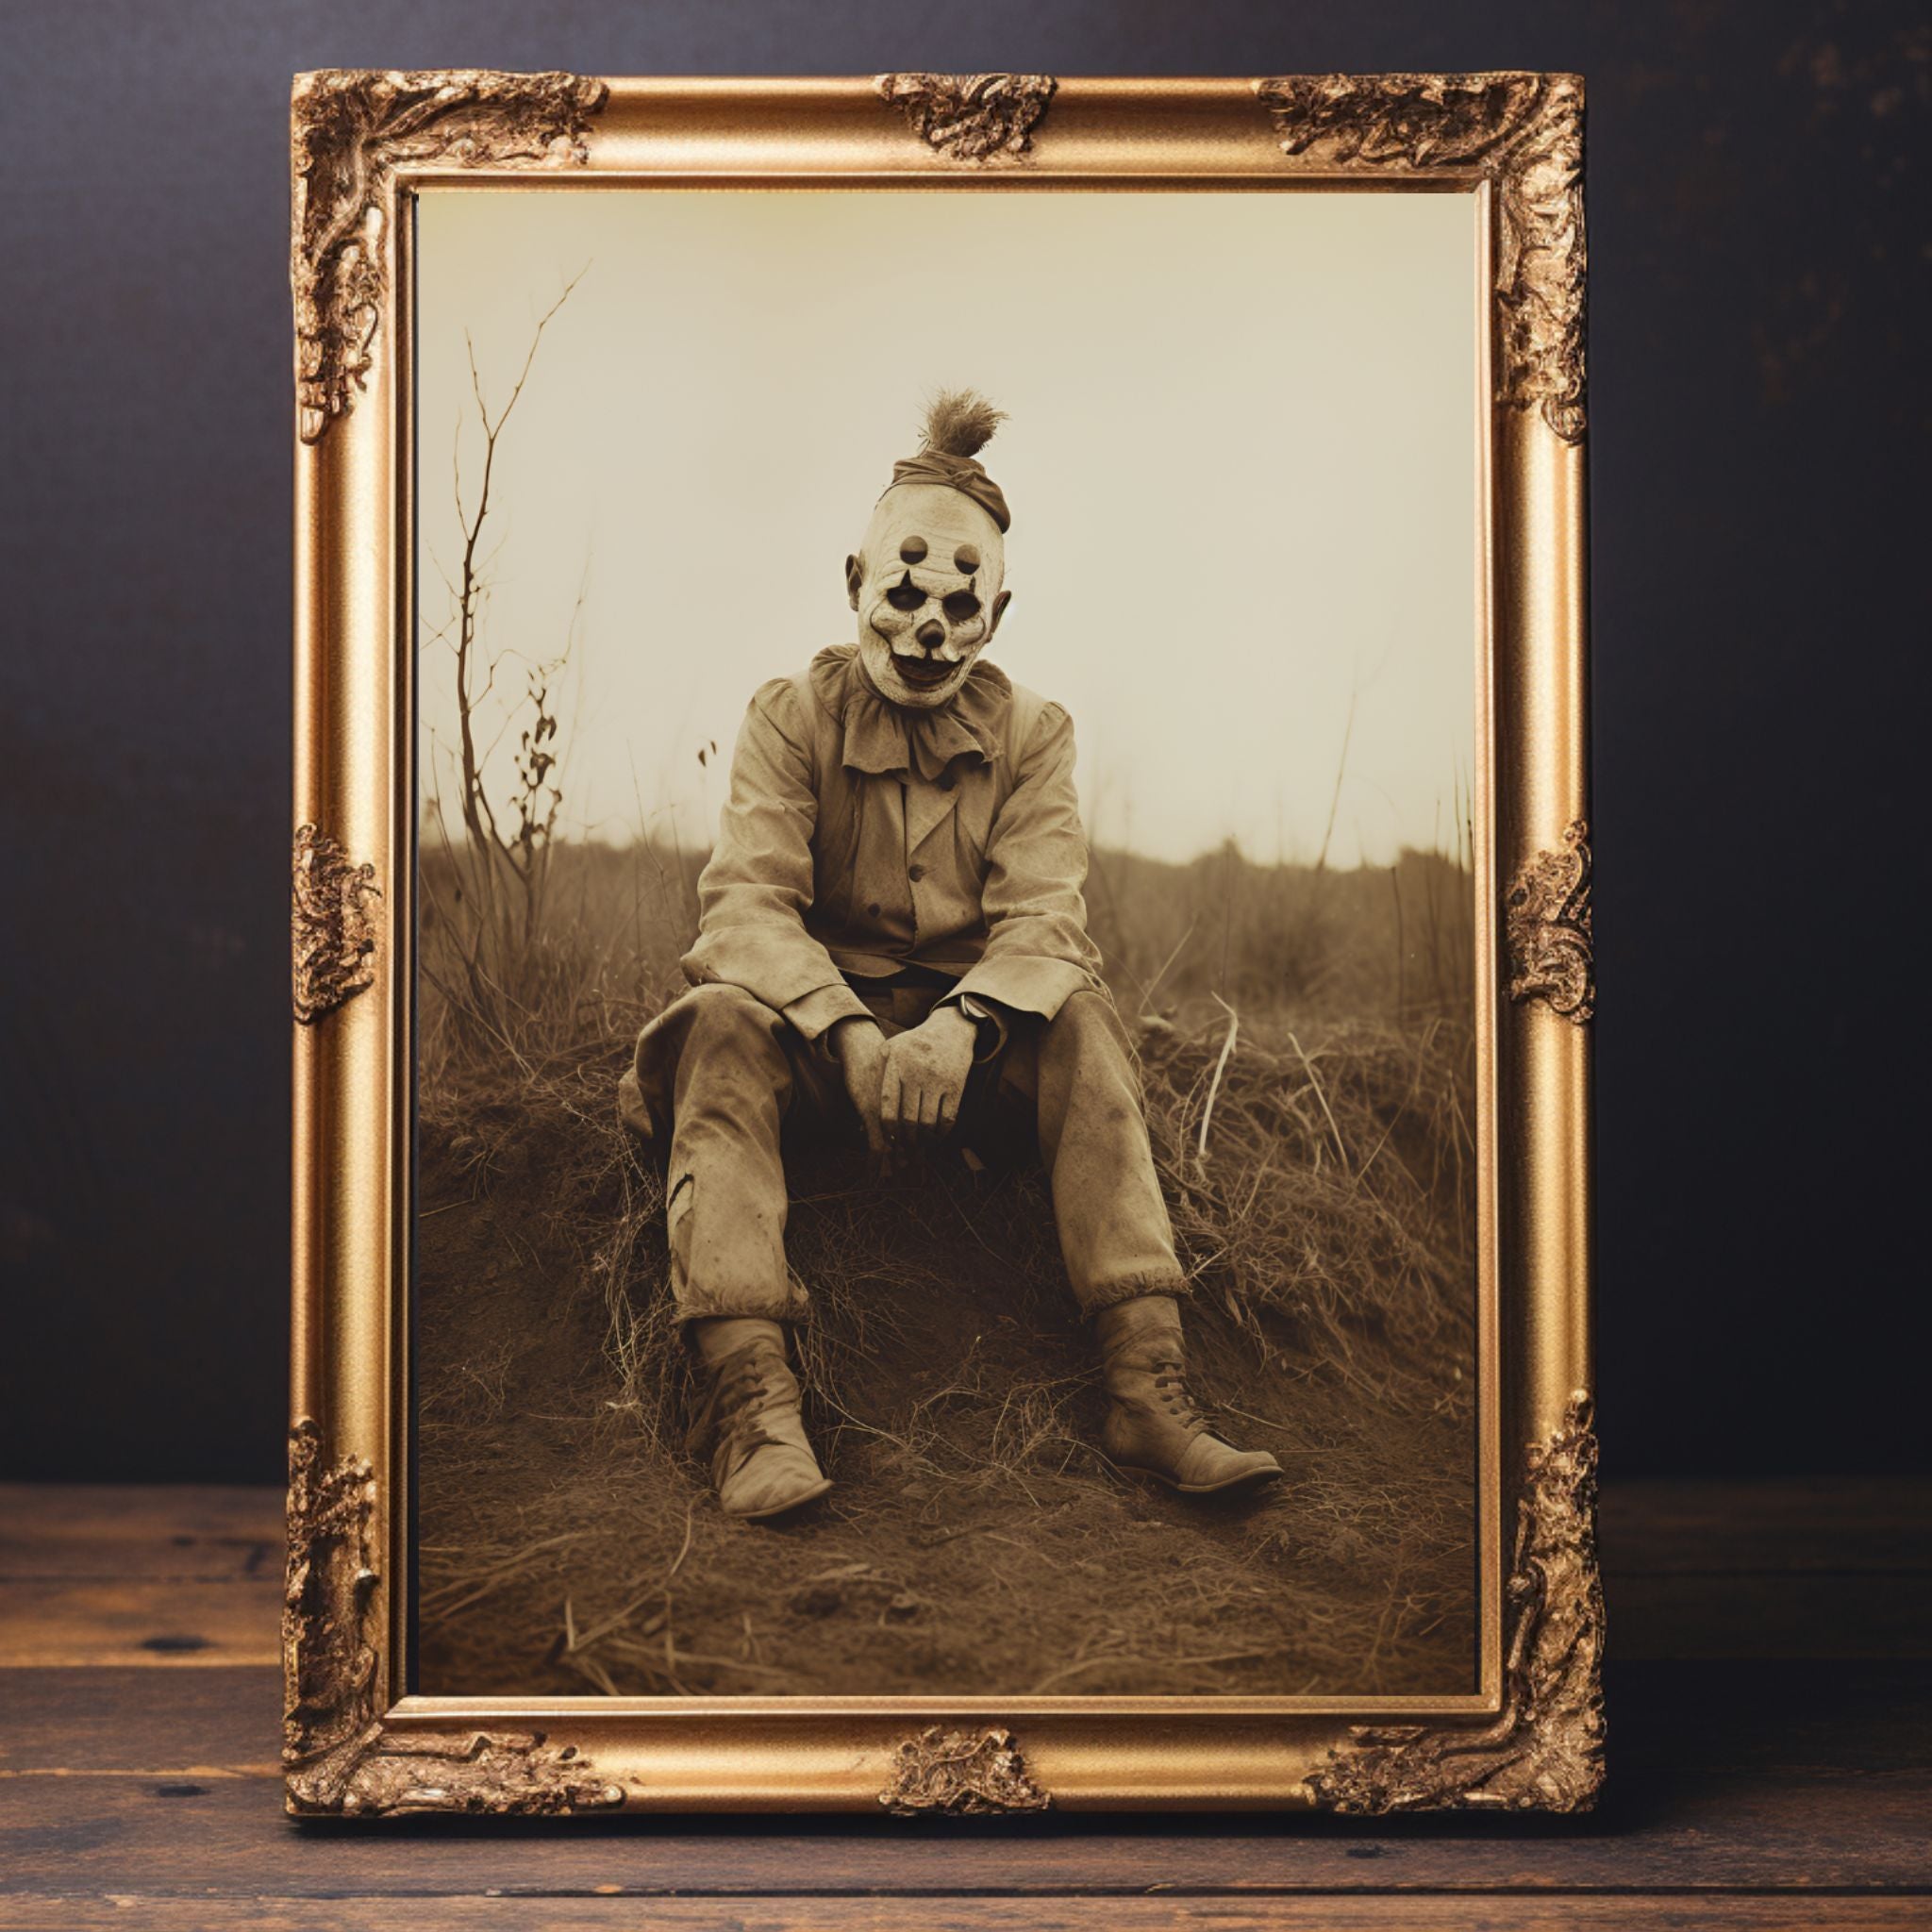 Scary Clown of Texas Vintage Photography Art Poster Print